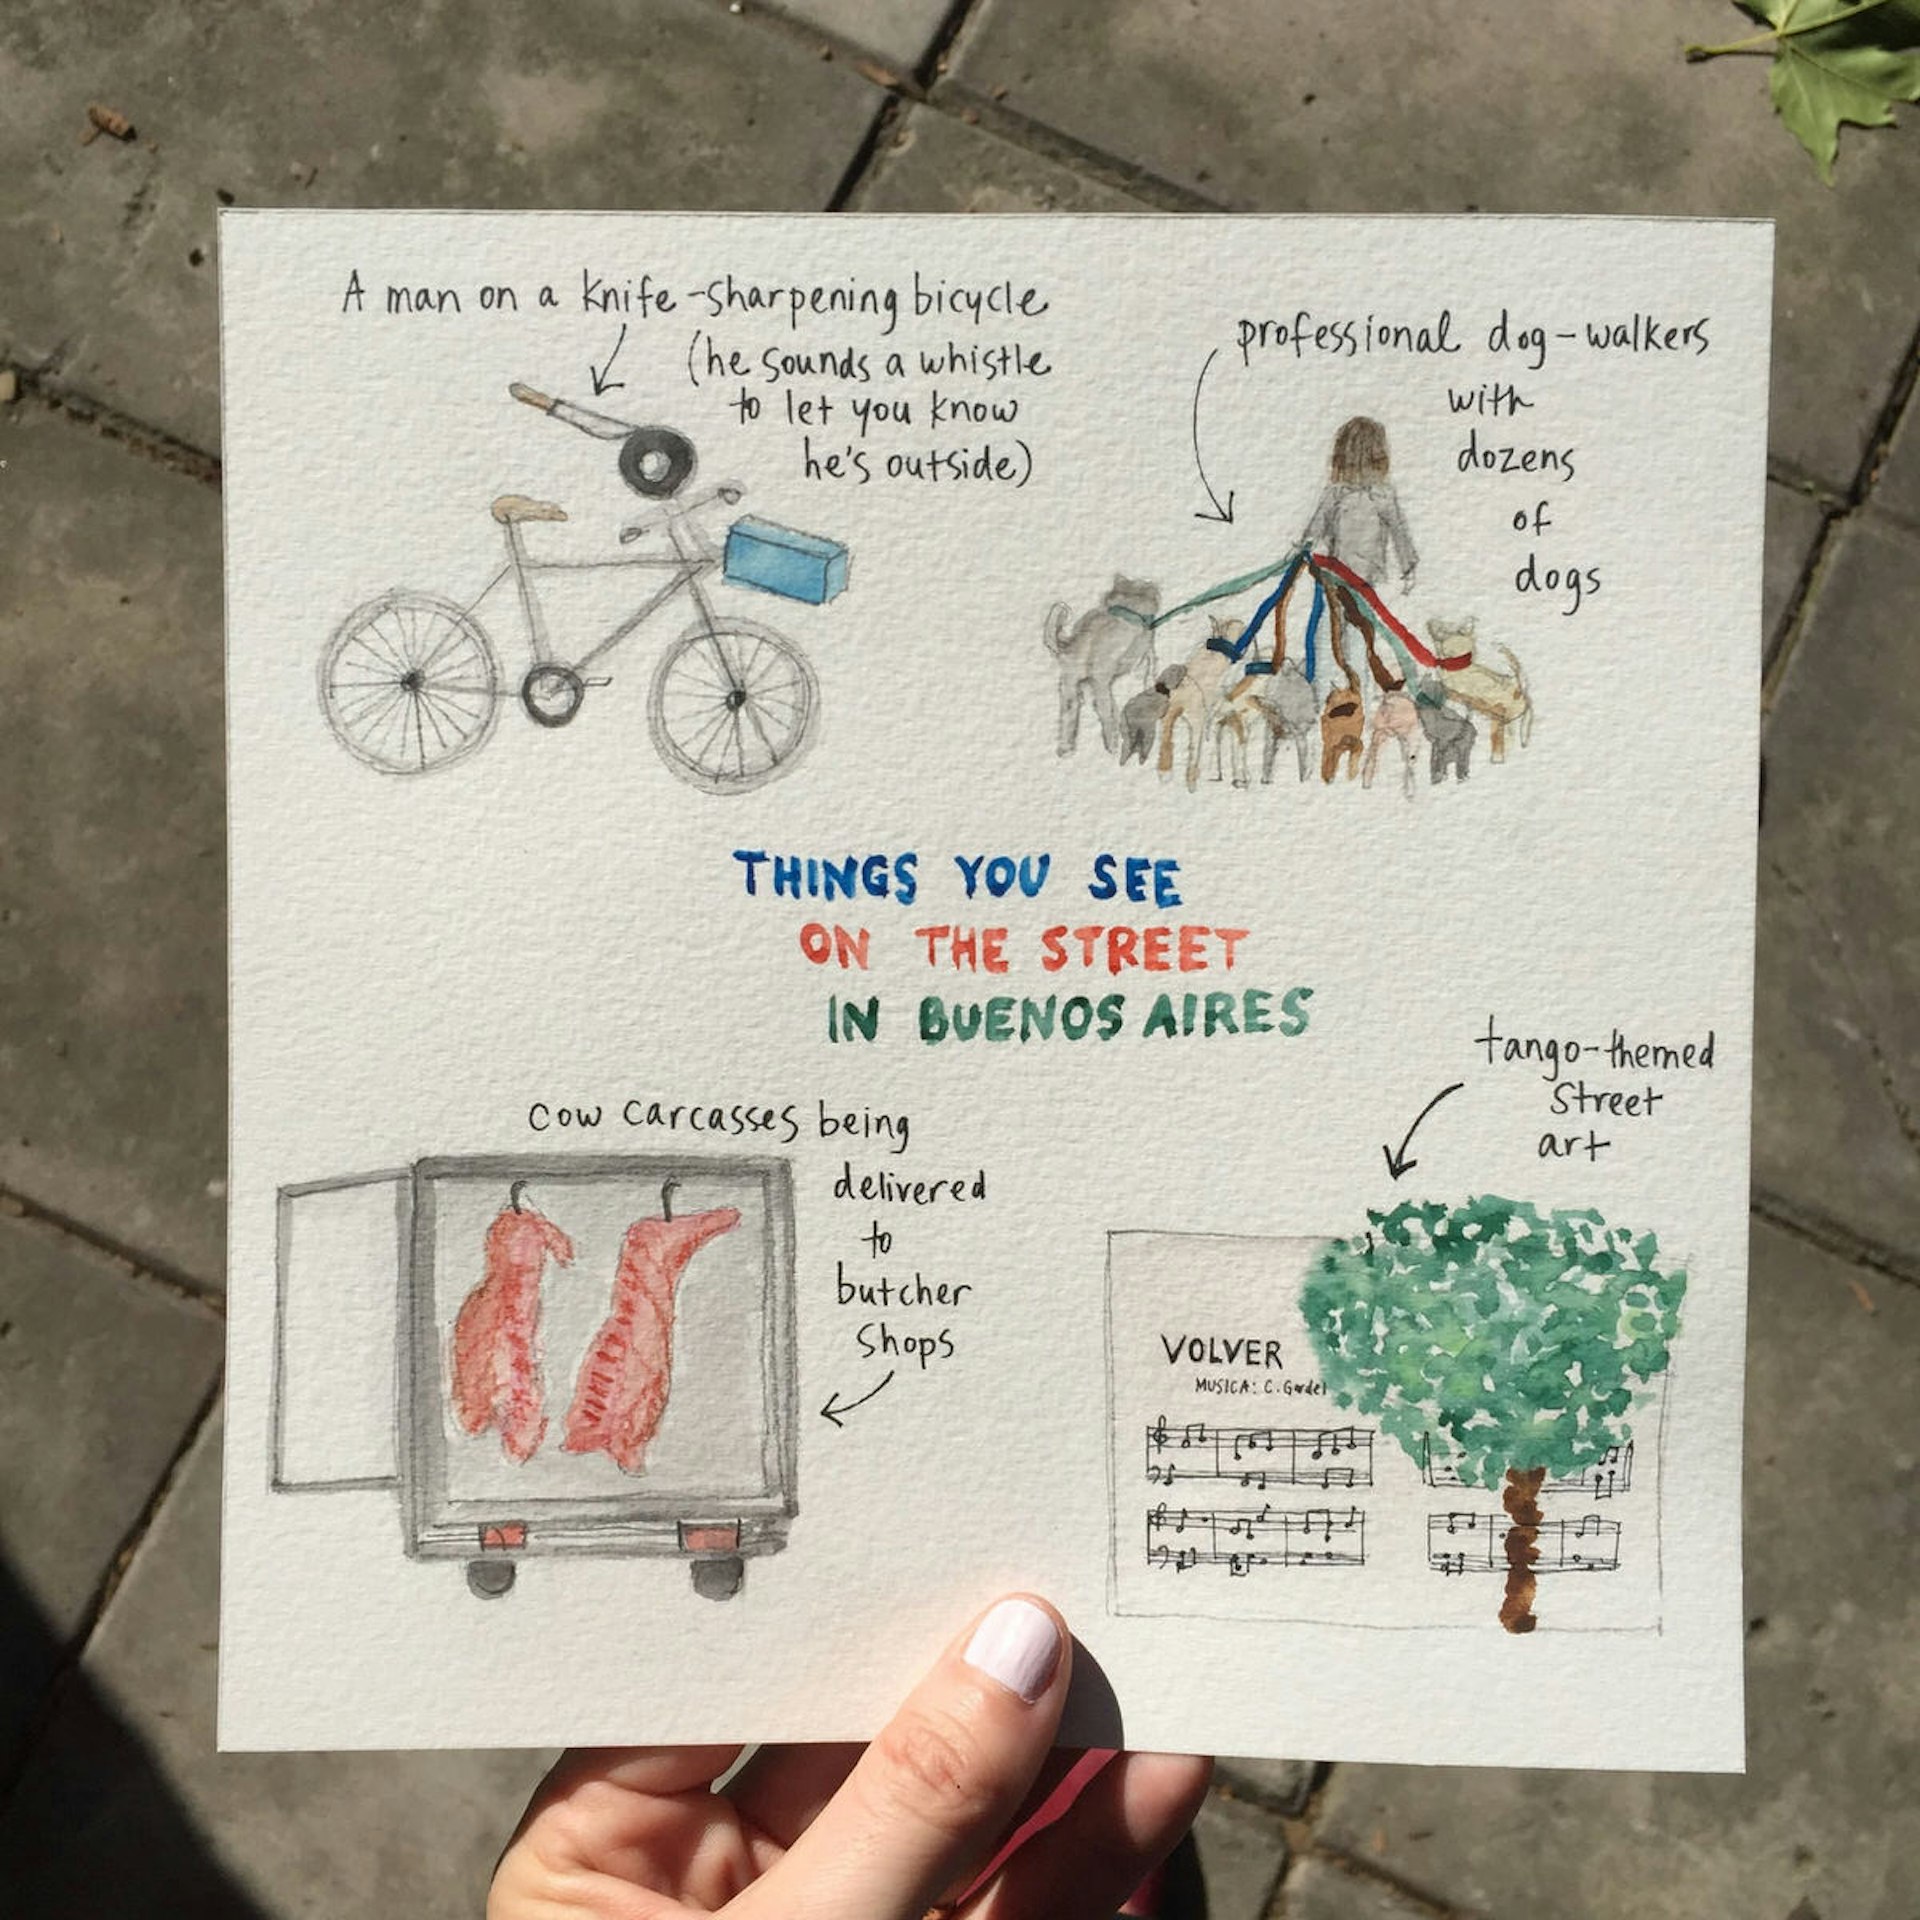 The writer's sketch of things she saw on the street in Buenos Aires, Argentina